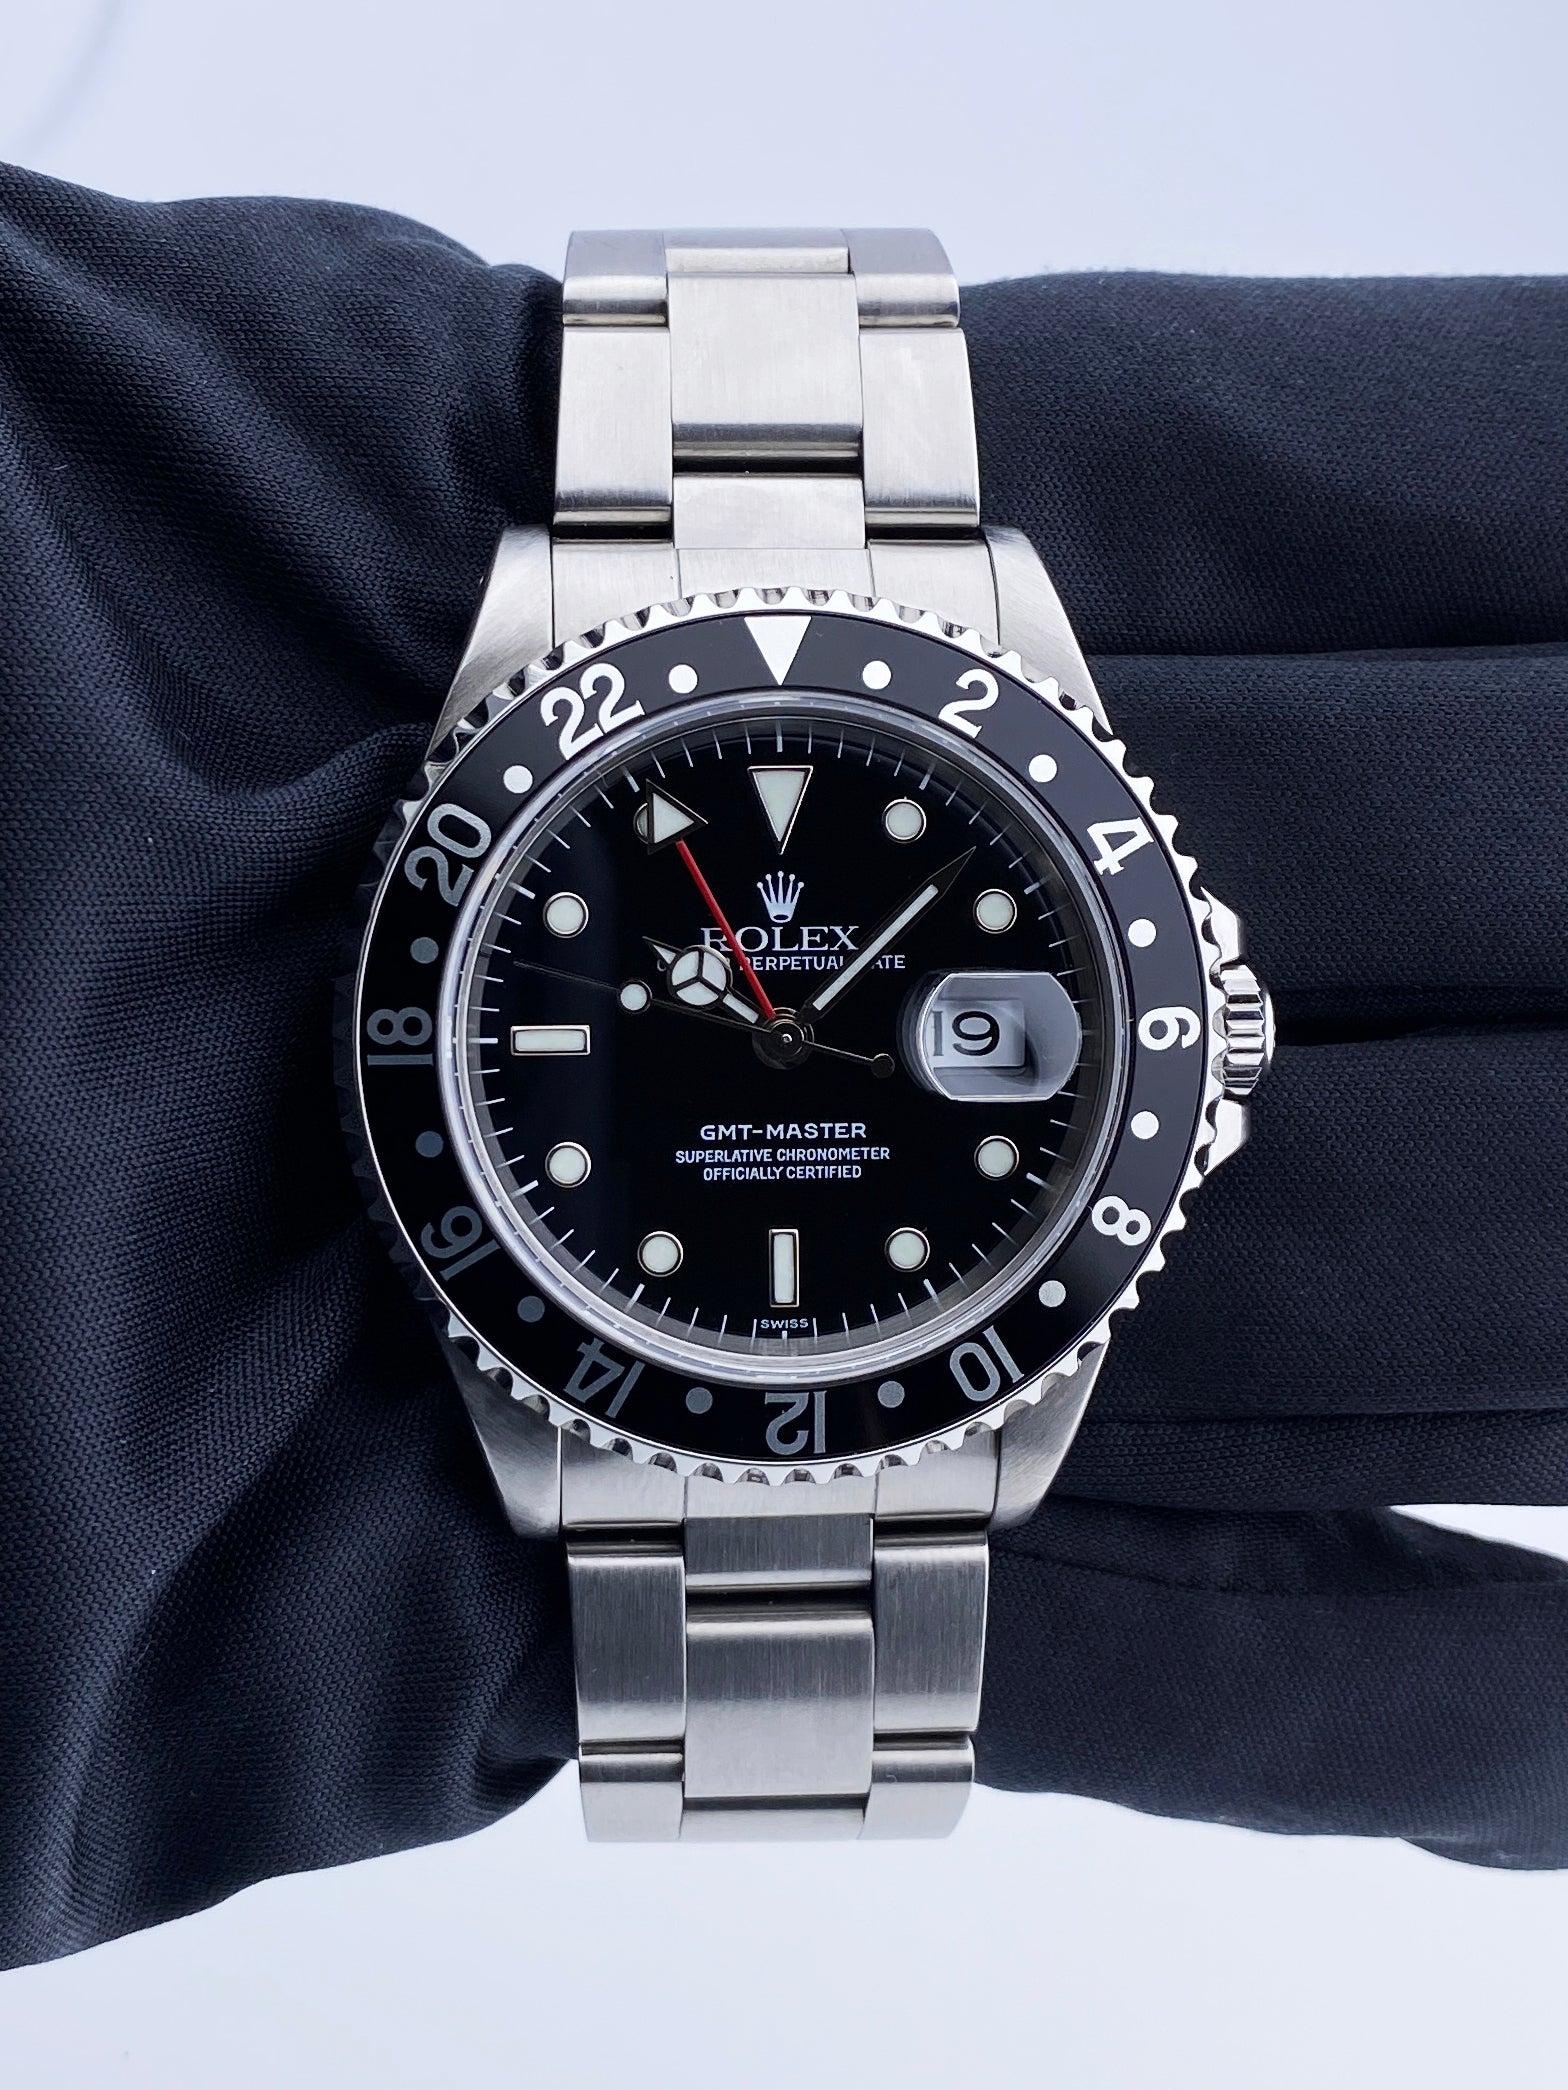 Rolex GMT-Master 16700 Mens Watch. 40mm stainless steel case. Stainless steel bidirectional bezel. Black dial with luminous steel hands and index dot hour markers. Minute markers on the outer dial. Date display at the 3 o'clock position. Stainless